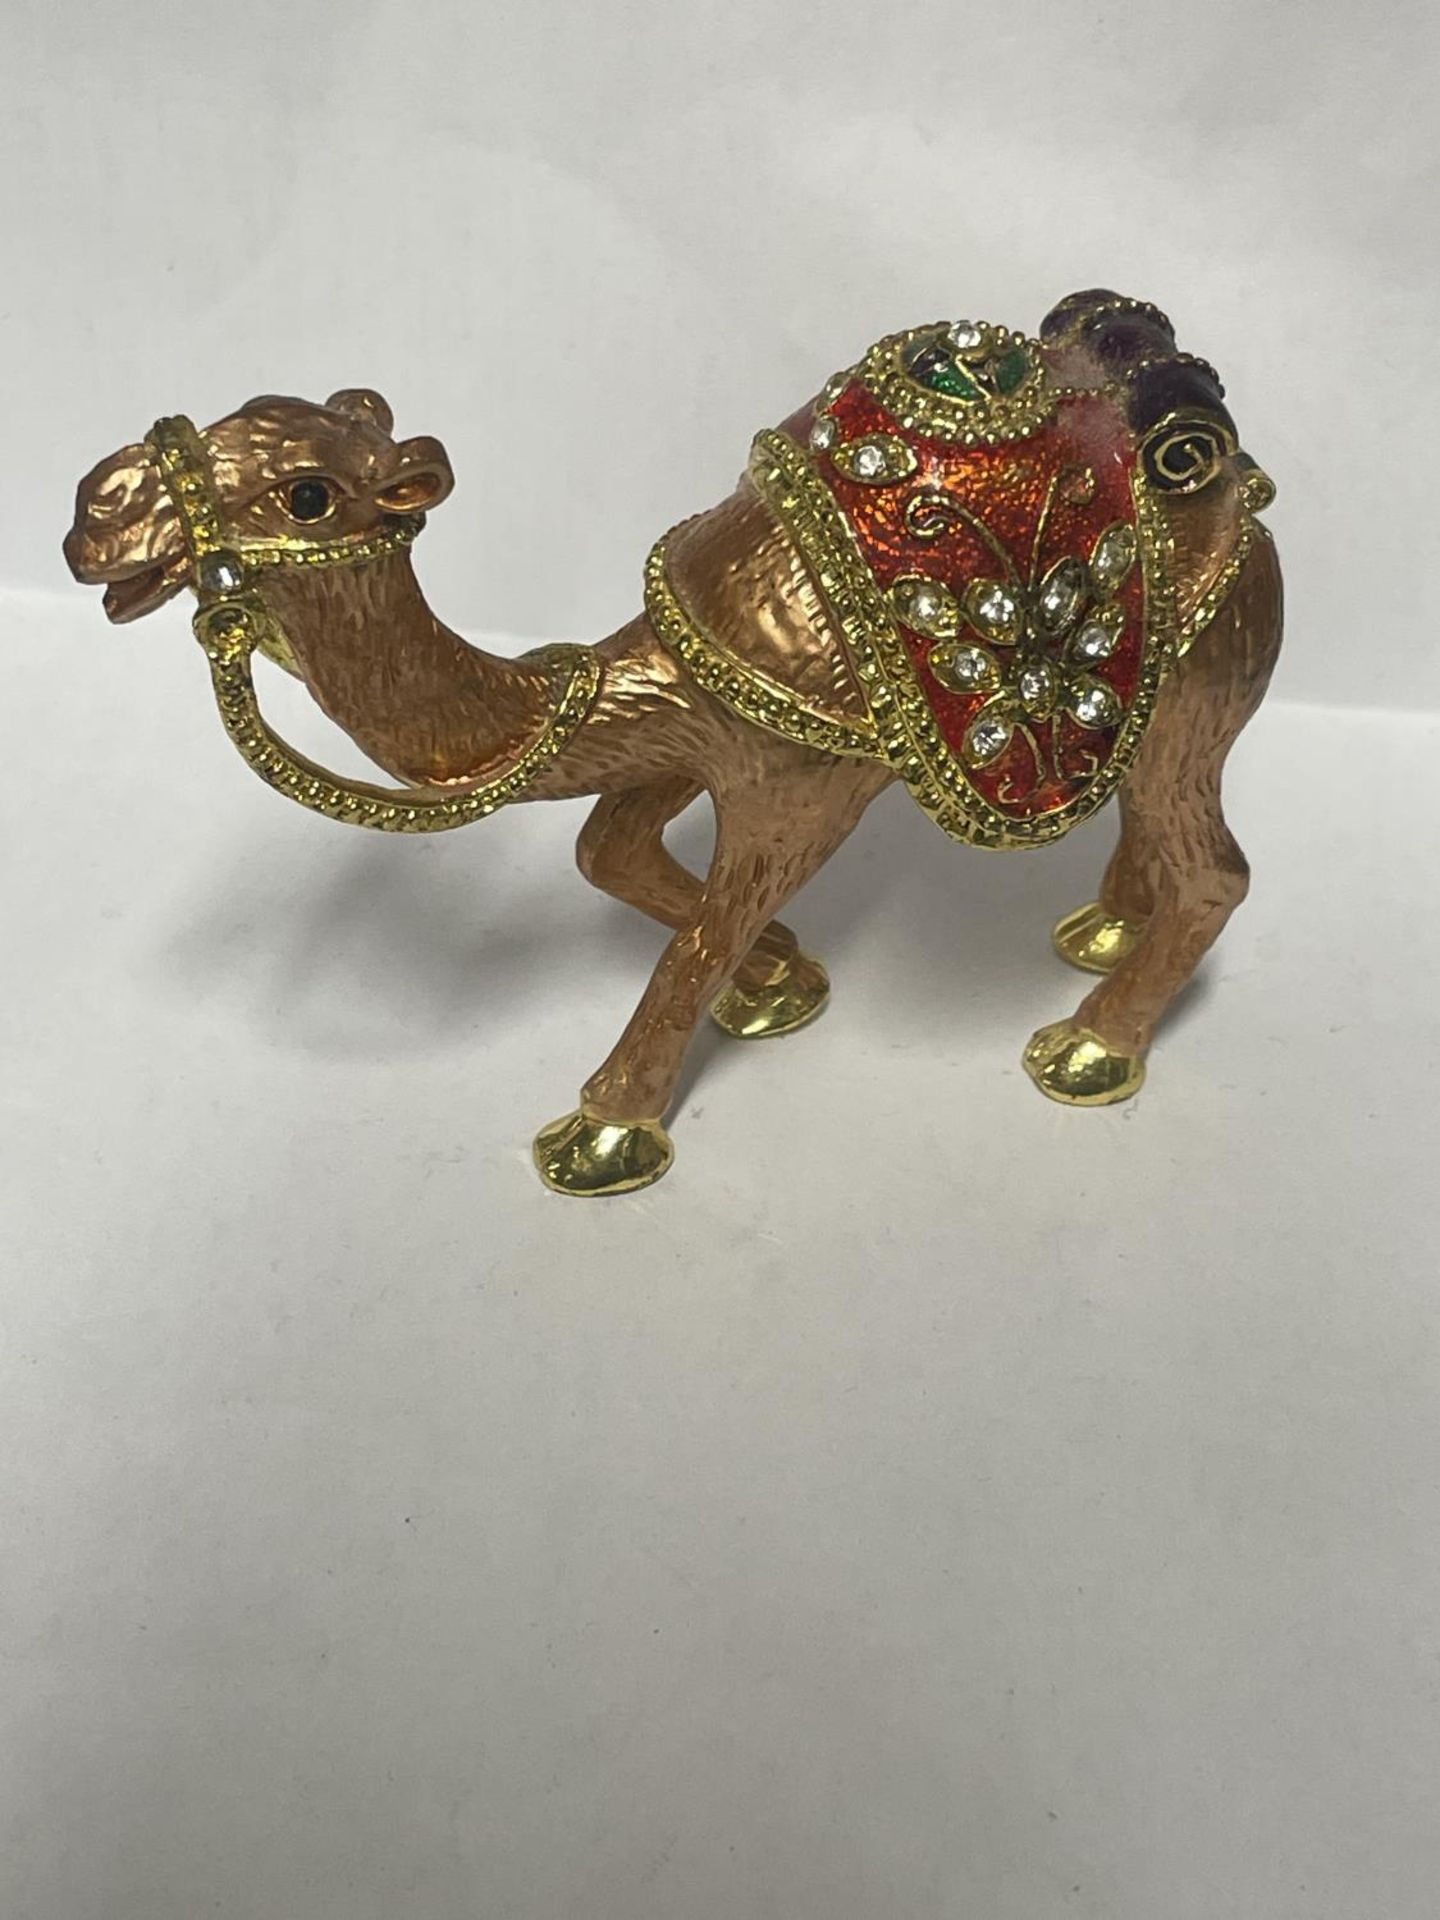 A HIDDEN TREASURES HAND PAINTED CAMEL DESIGN TRINKET BOX EMBELLISHED WITH CRYSTALS - Image 2 of 3